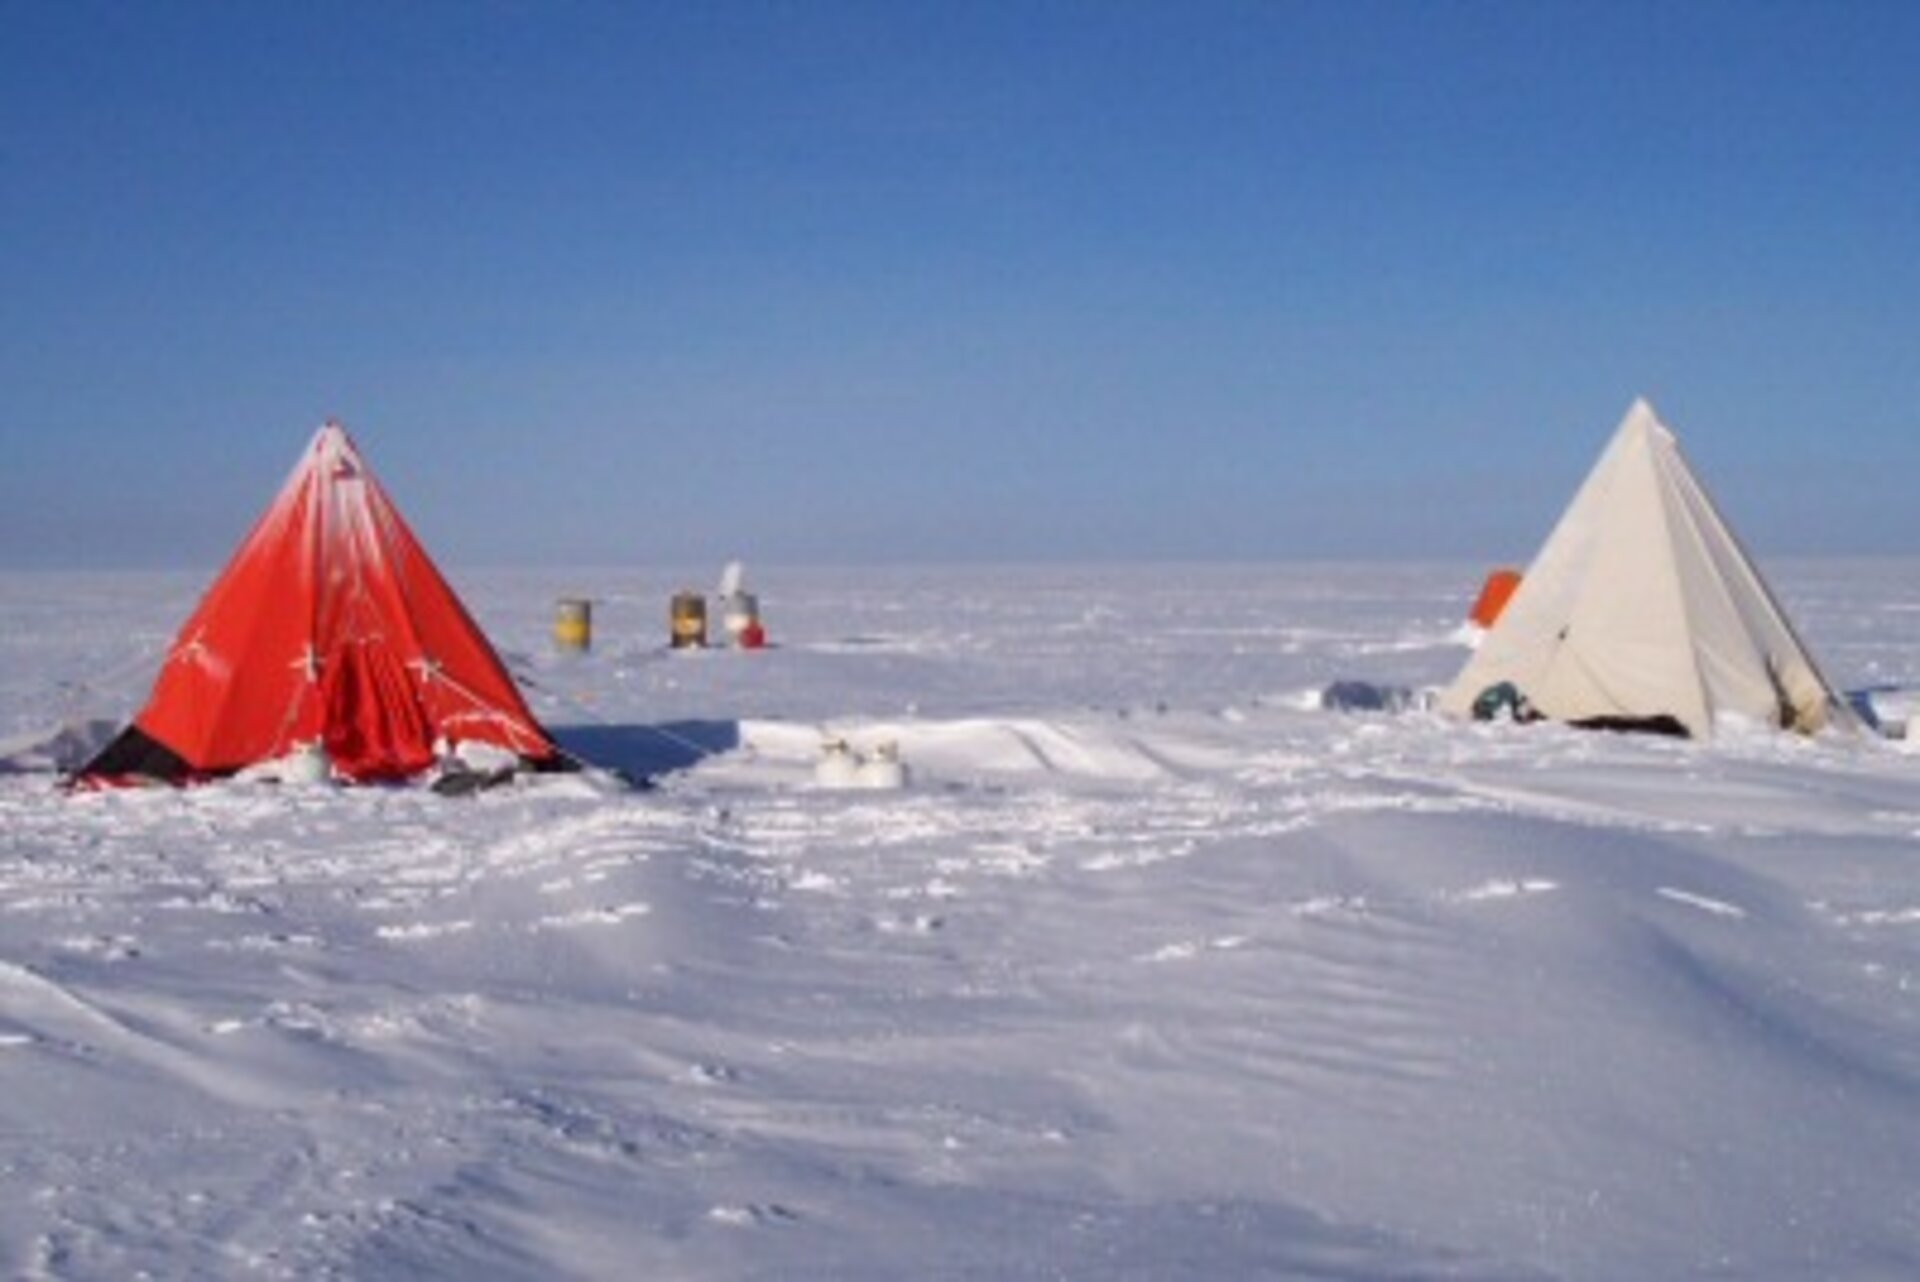 Typical living quarters for the scientists on the ice sheet